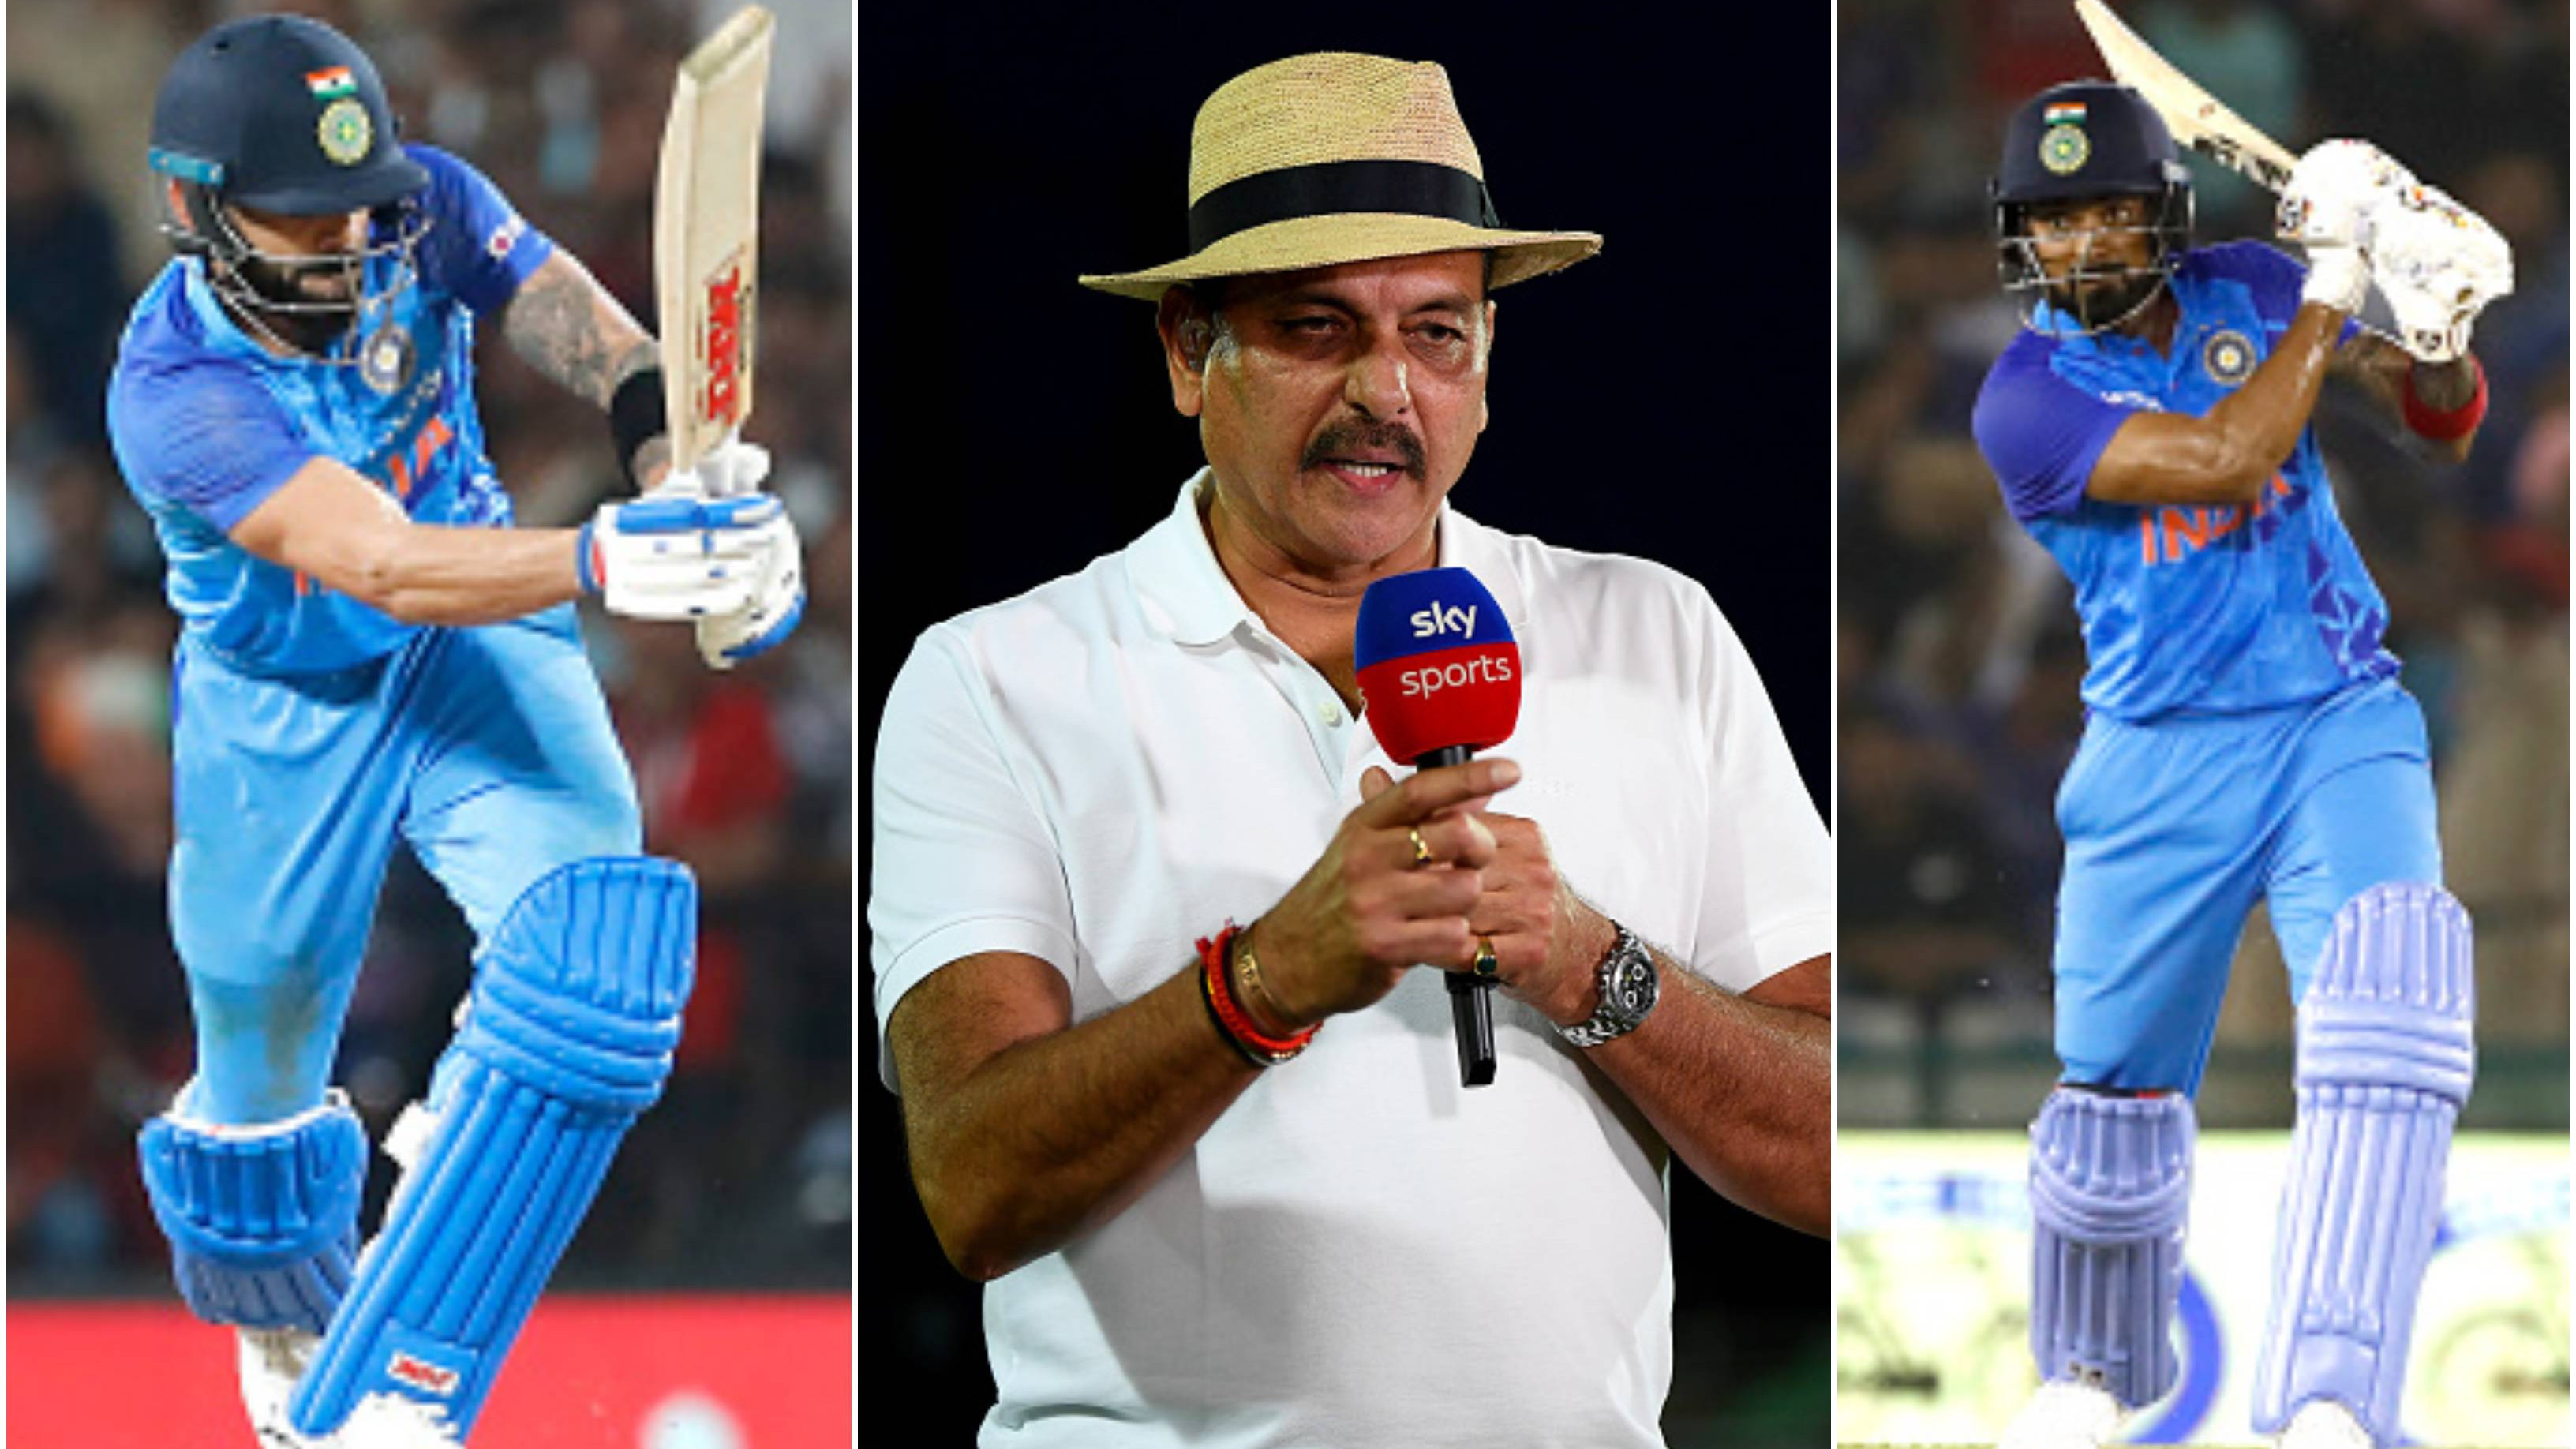 IND v AUS 2022: “Why confuse him?” Ravi Shastri on Kohli vs Rahul debate as India’s opener for T20 World Cup